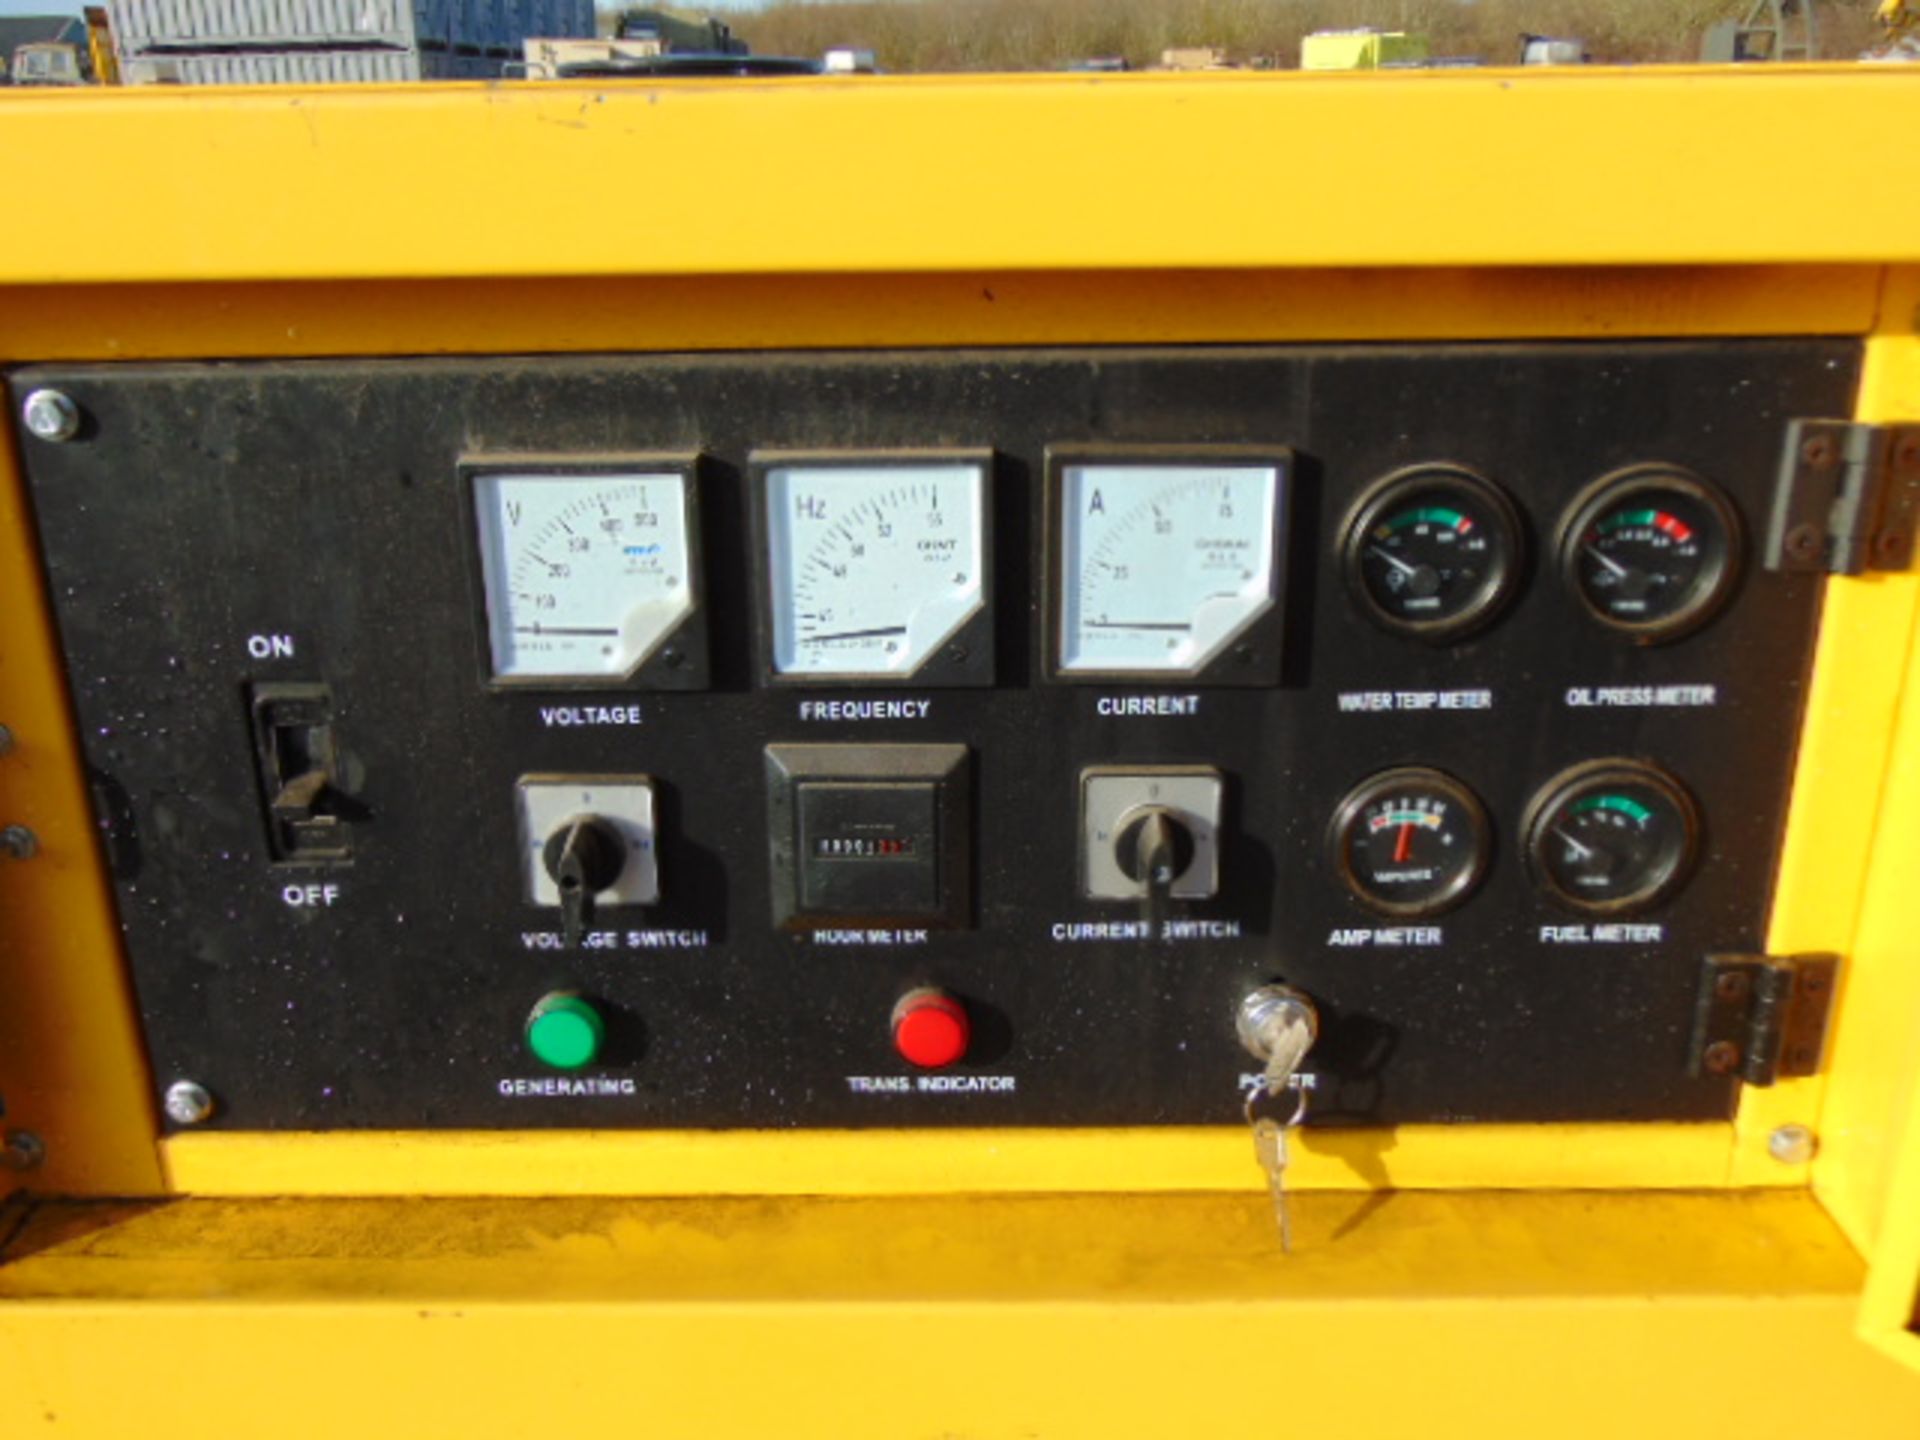 UNISSUED WITH TEST HOURS ONLY 40 KVA 3 Phase Silent Diesel Generator Set - Image 11 of 12